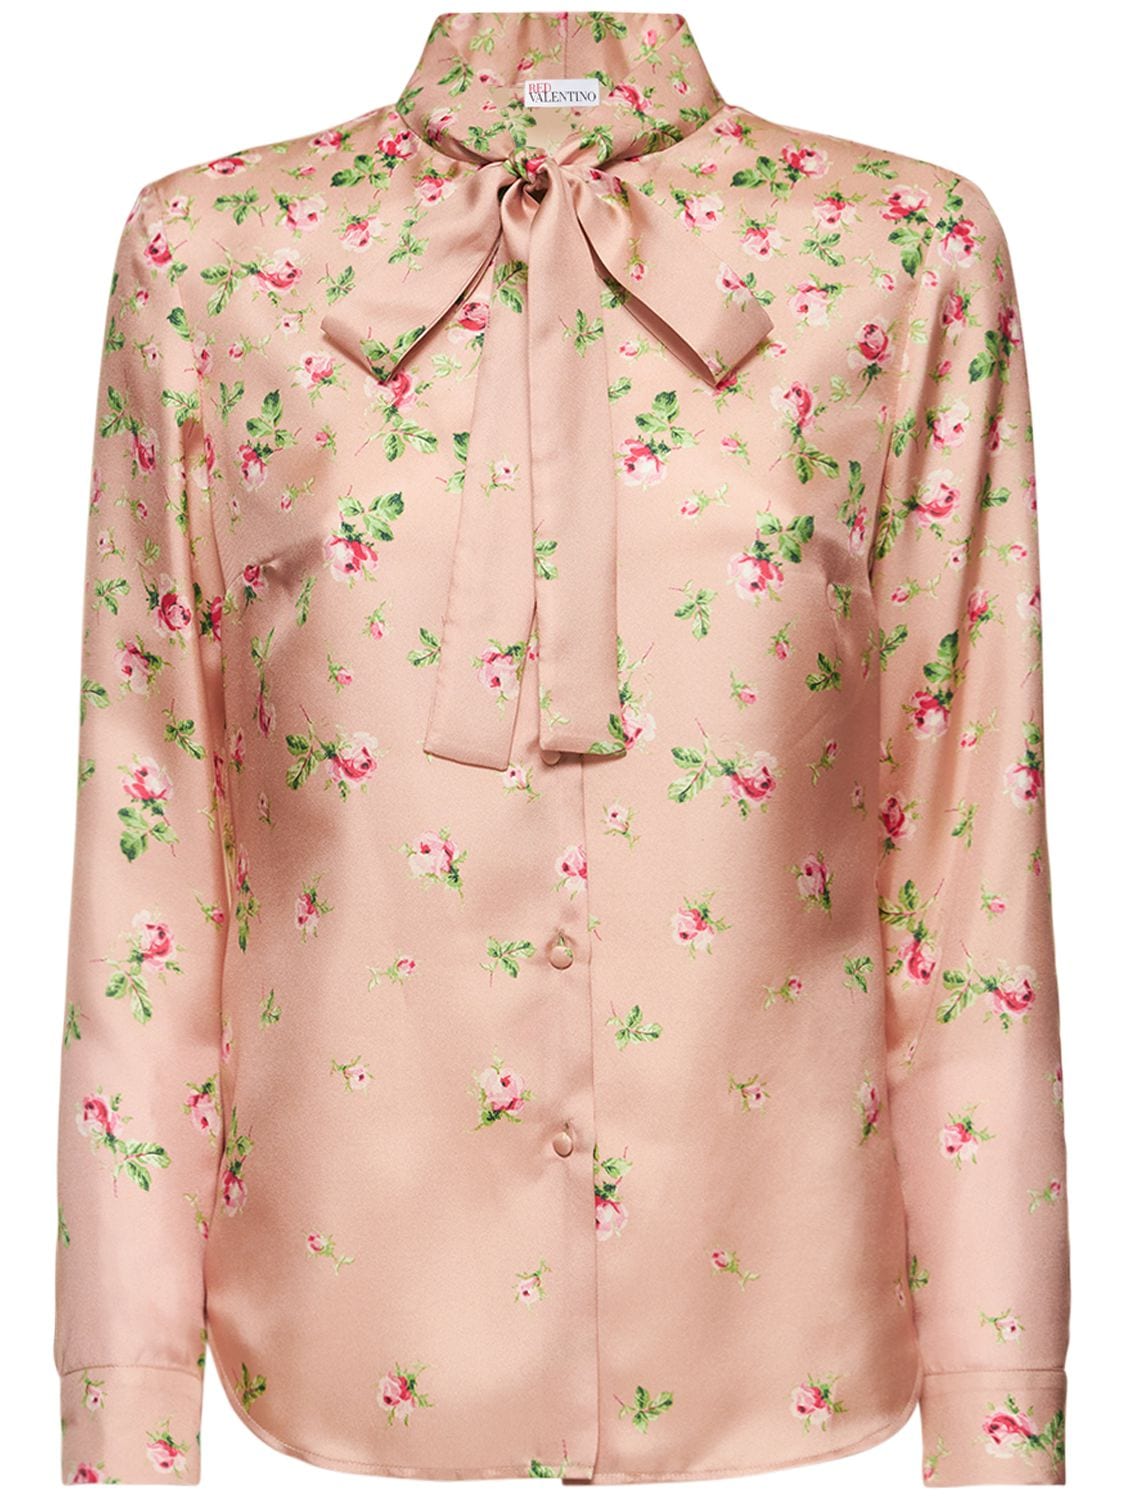 Red Valentino Floral Printed Silk Self-tie Shirt In Pink,multi